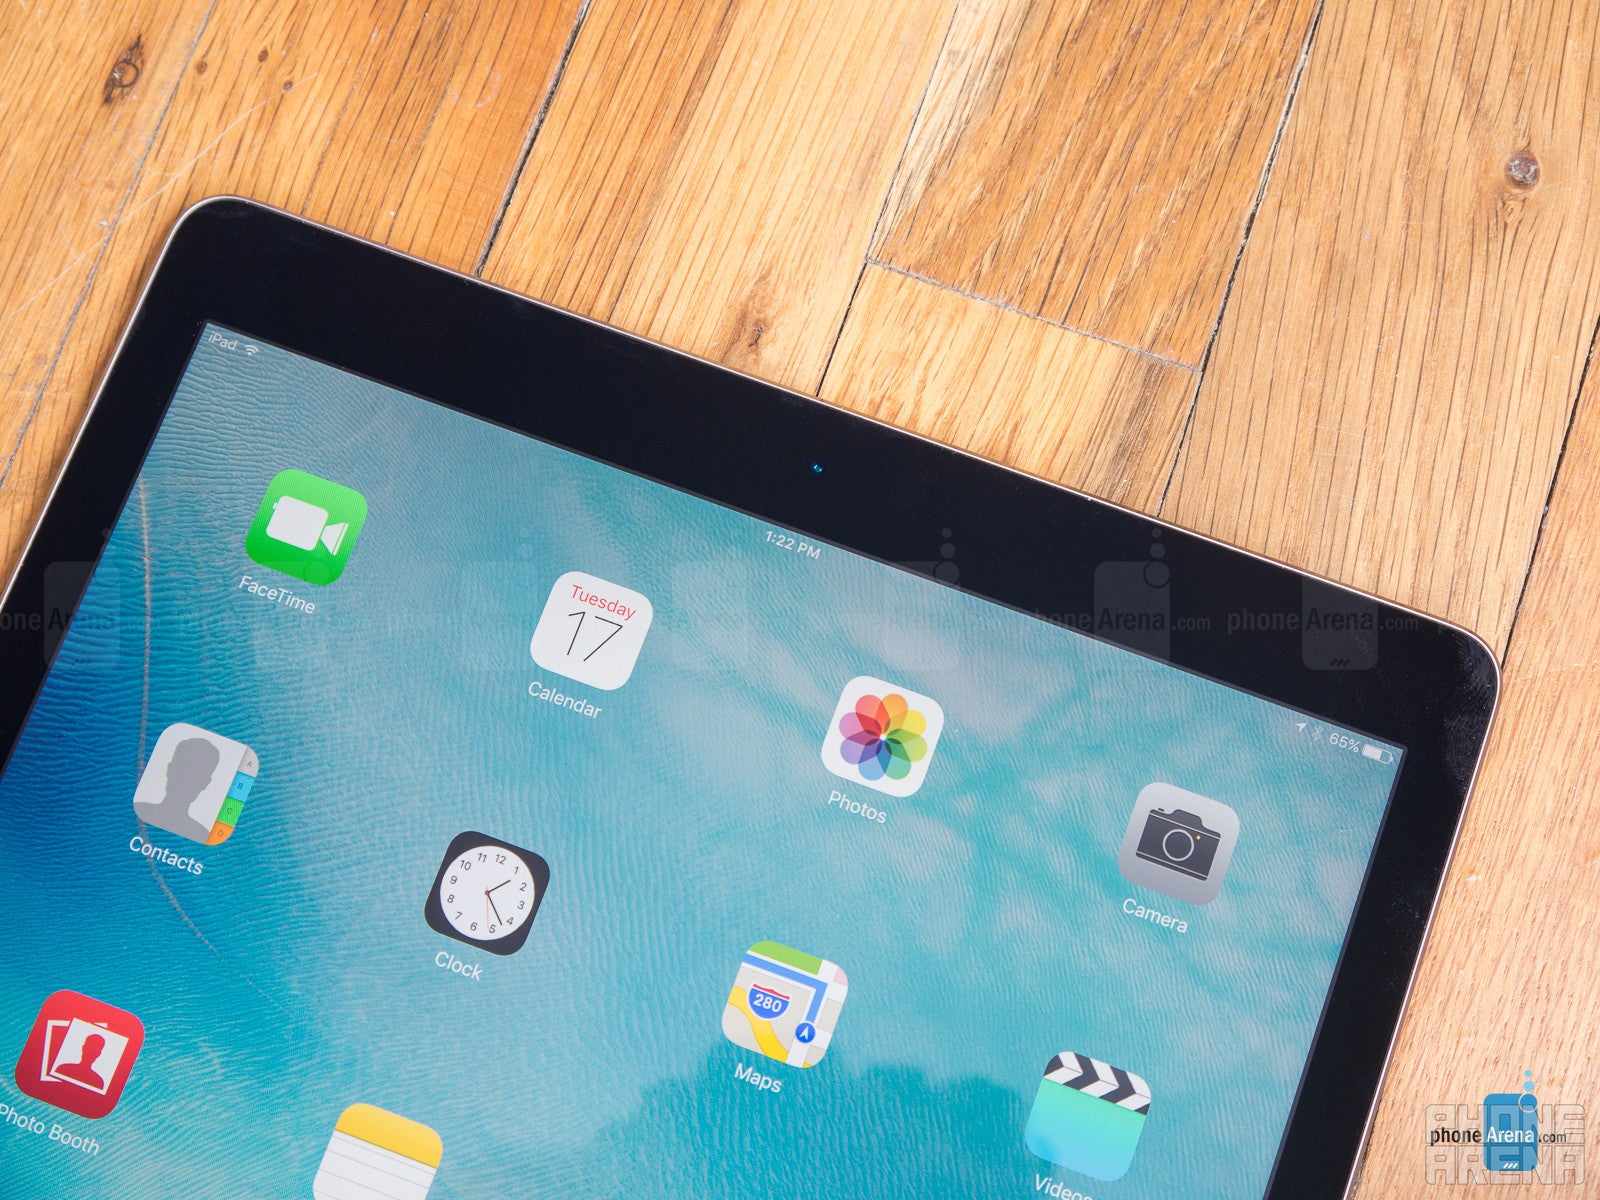 Apple might bring a 4K display to the tablet, though rumors are murky. - iPad Air 3 Rumor Review: Apple slims the iPad Pro down for the masses